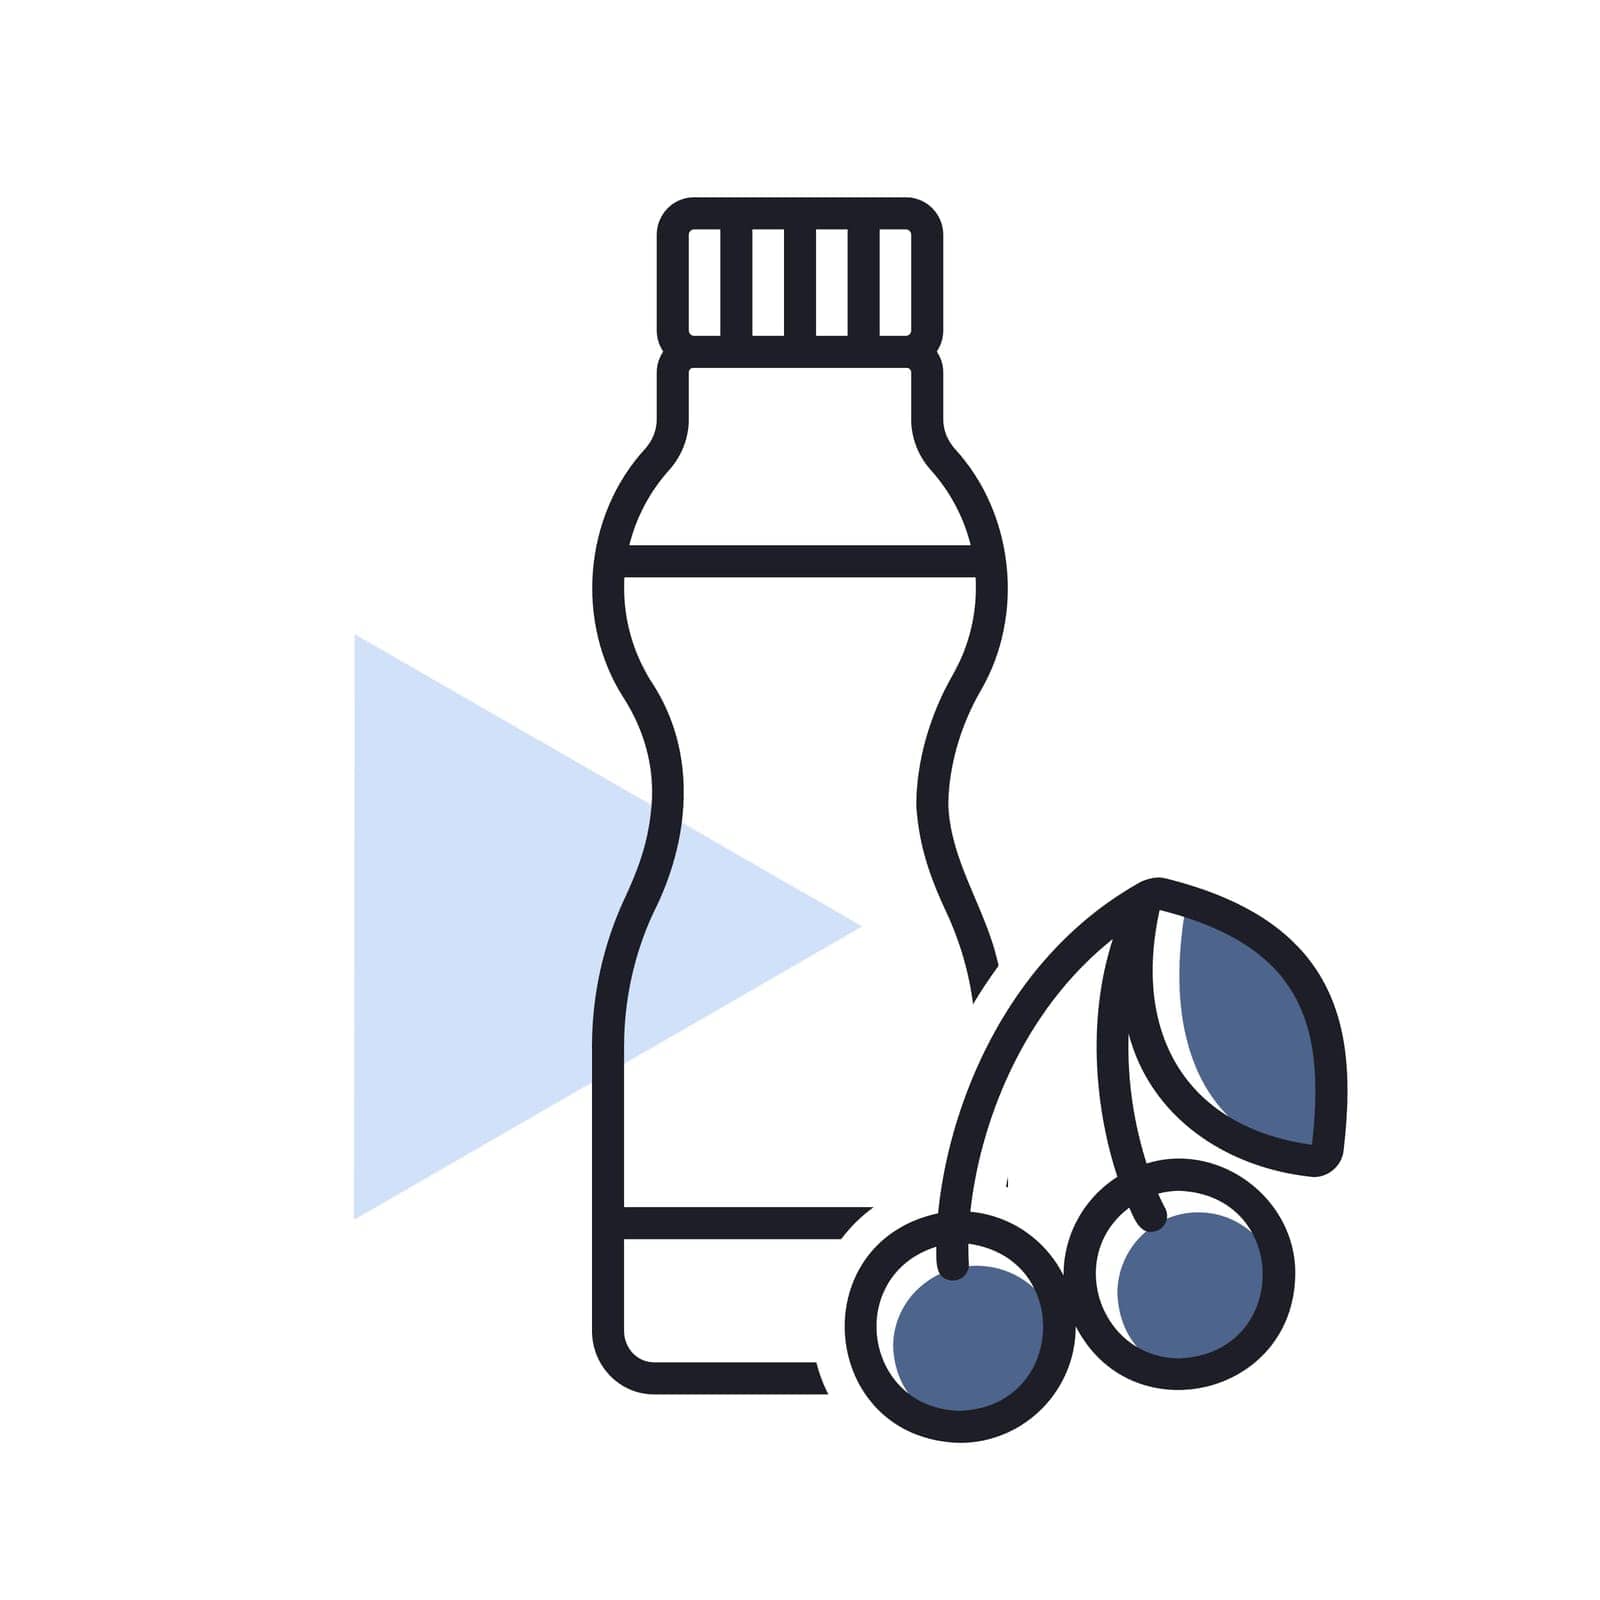 Drinkable yoghurt bottle with flavor cherry vector icon. Dairy product sign. Graph symbol for cooking web site and apps design, logo, app, UI